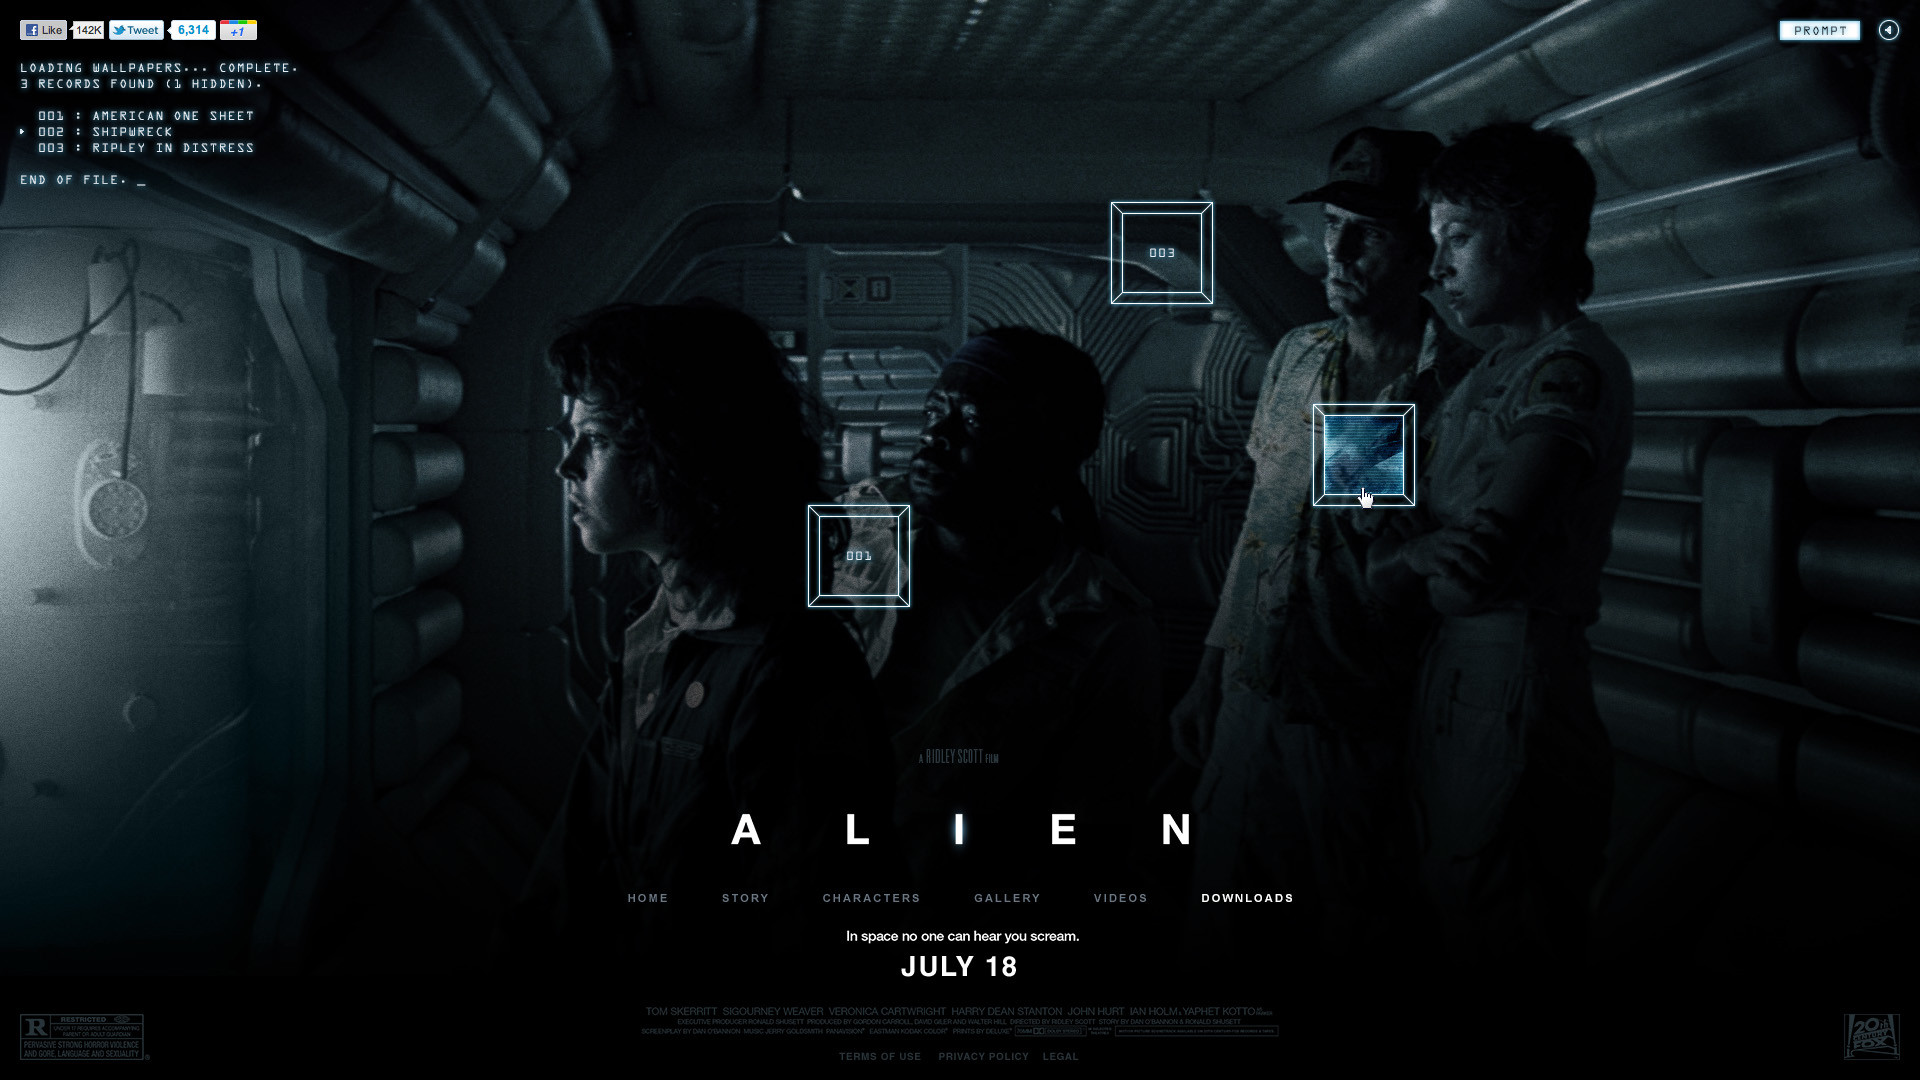 1920x1080 Download Alien New Latest Movie HD Wallpaper. Search more high .